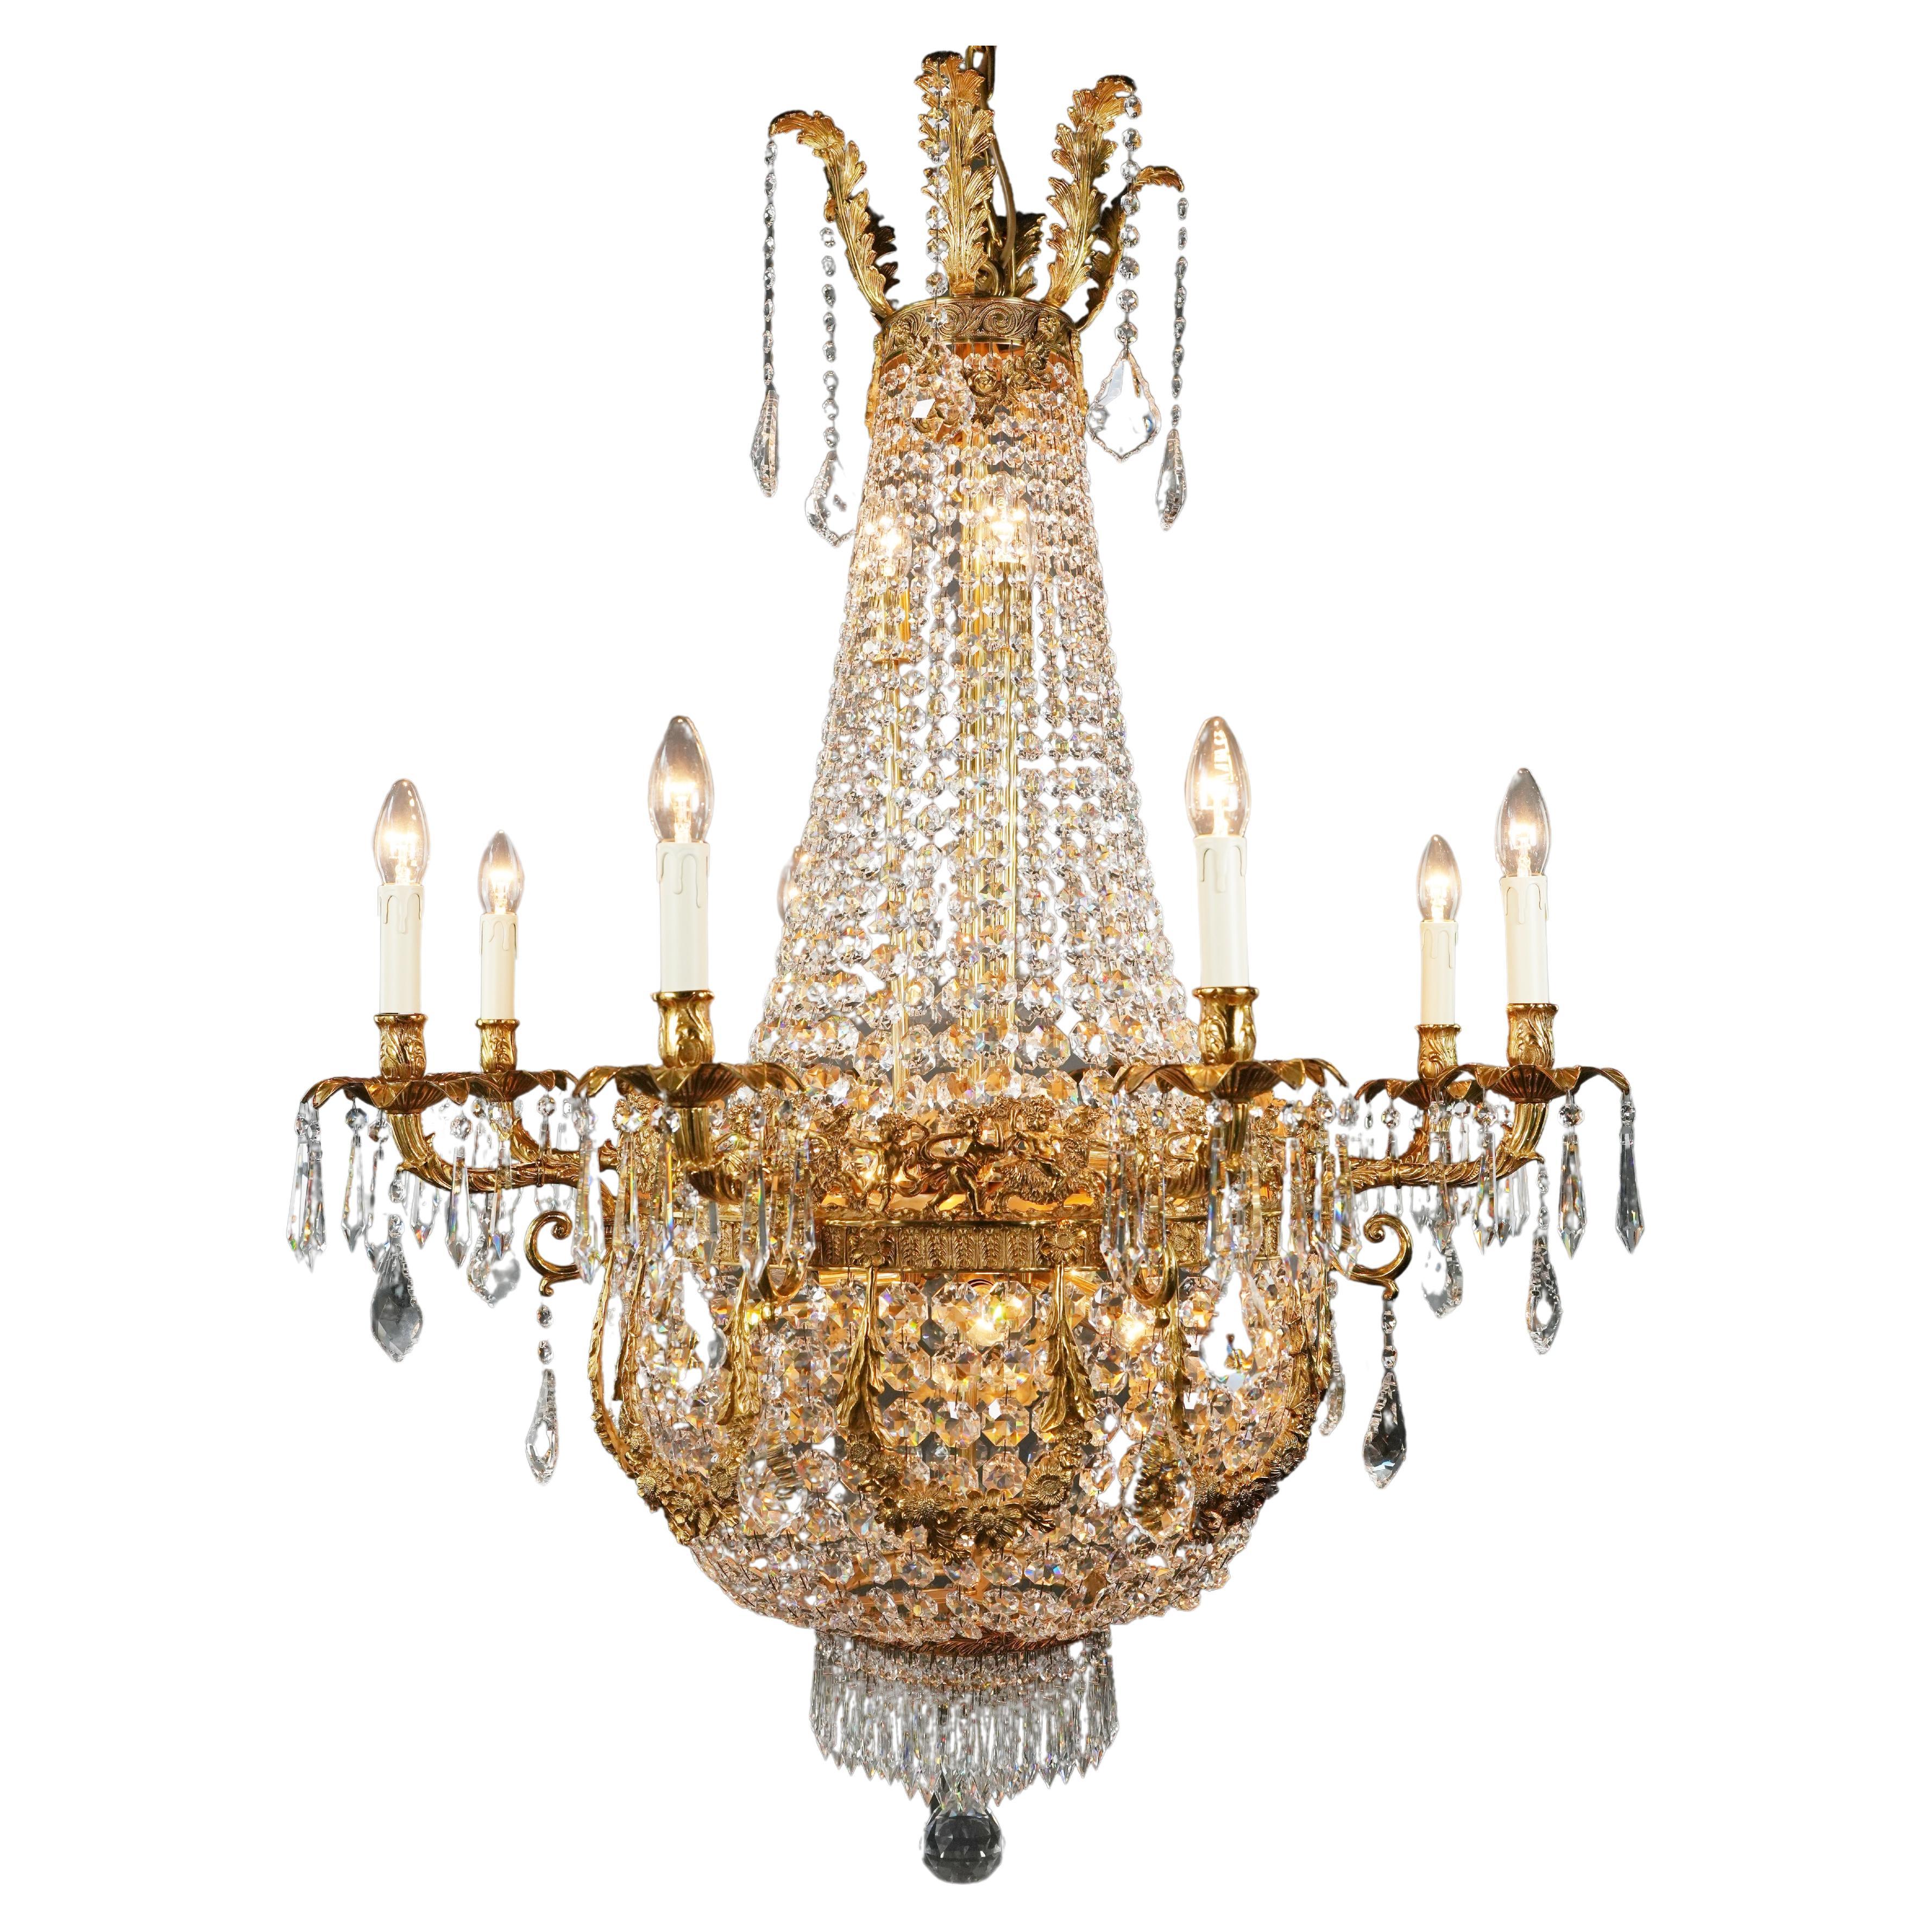 Putto Wreat Brass Basket Empire Sac a Pearl Chandelier Crystal and Antique Gold For Sale